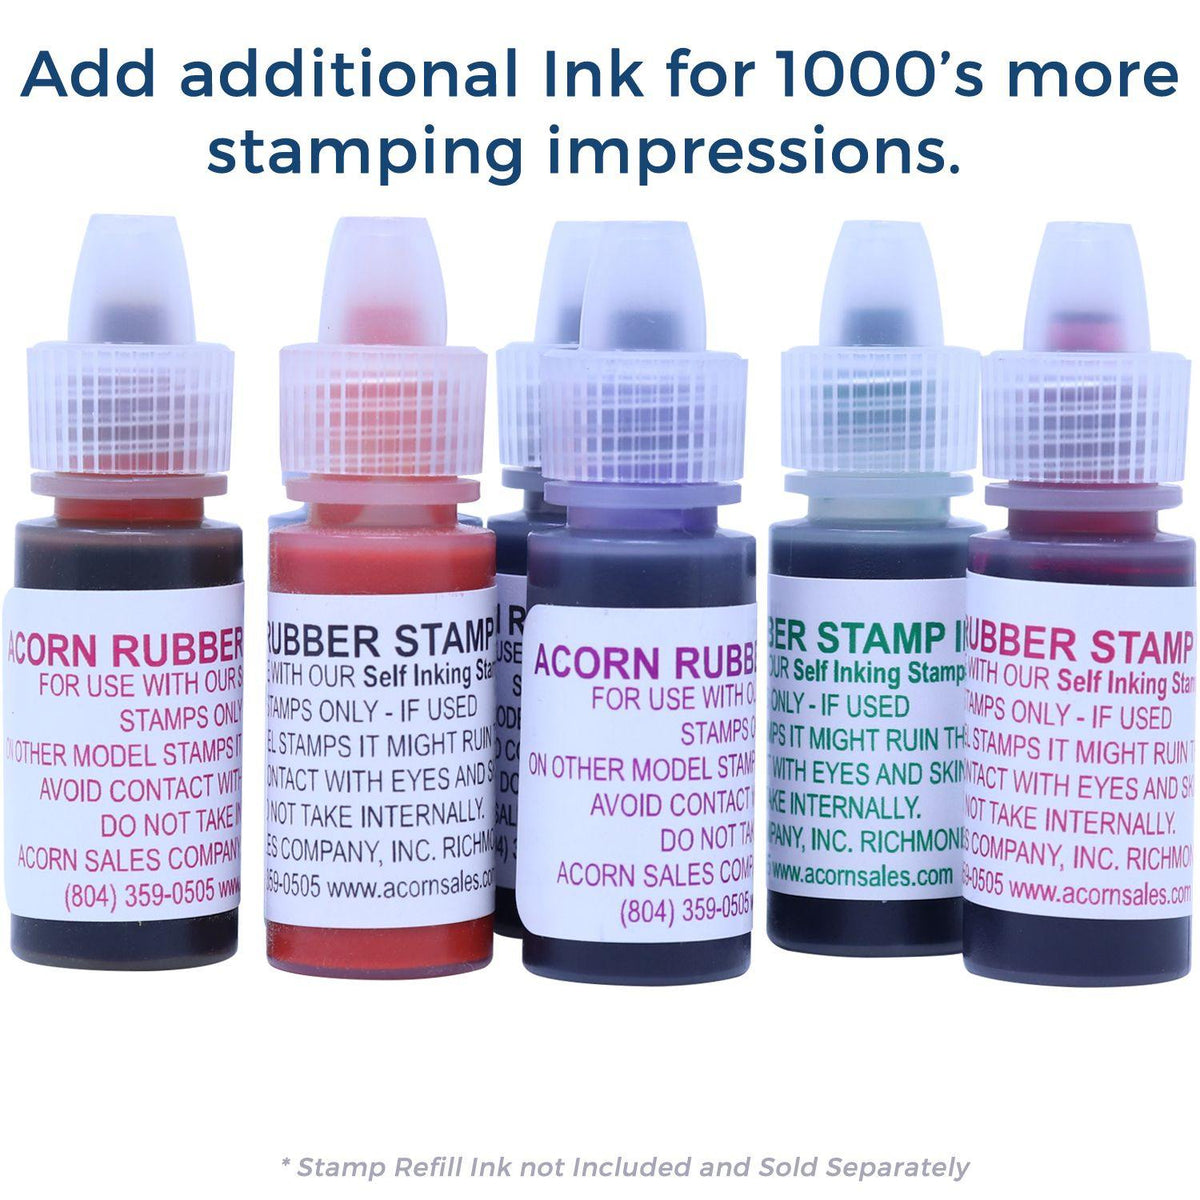 Refill Inks for Large Pre-Inked Much Better Keep Trying Stamp Available